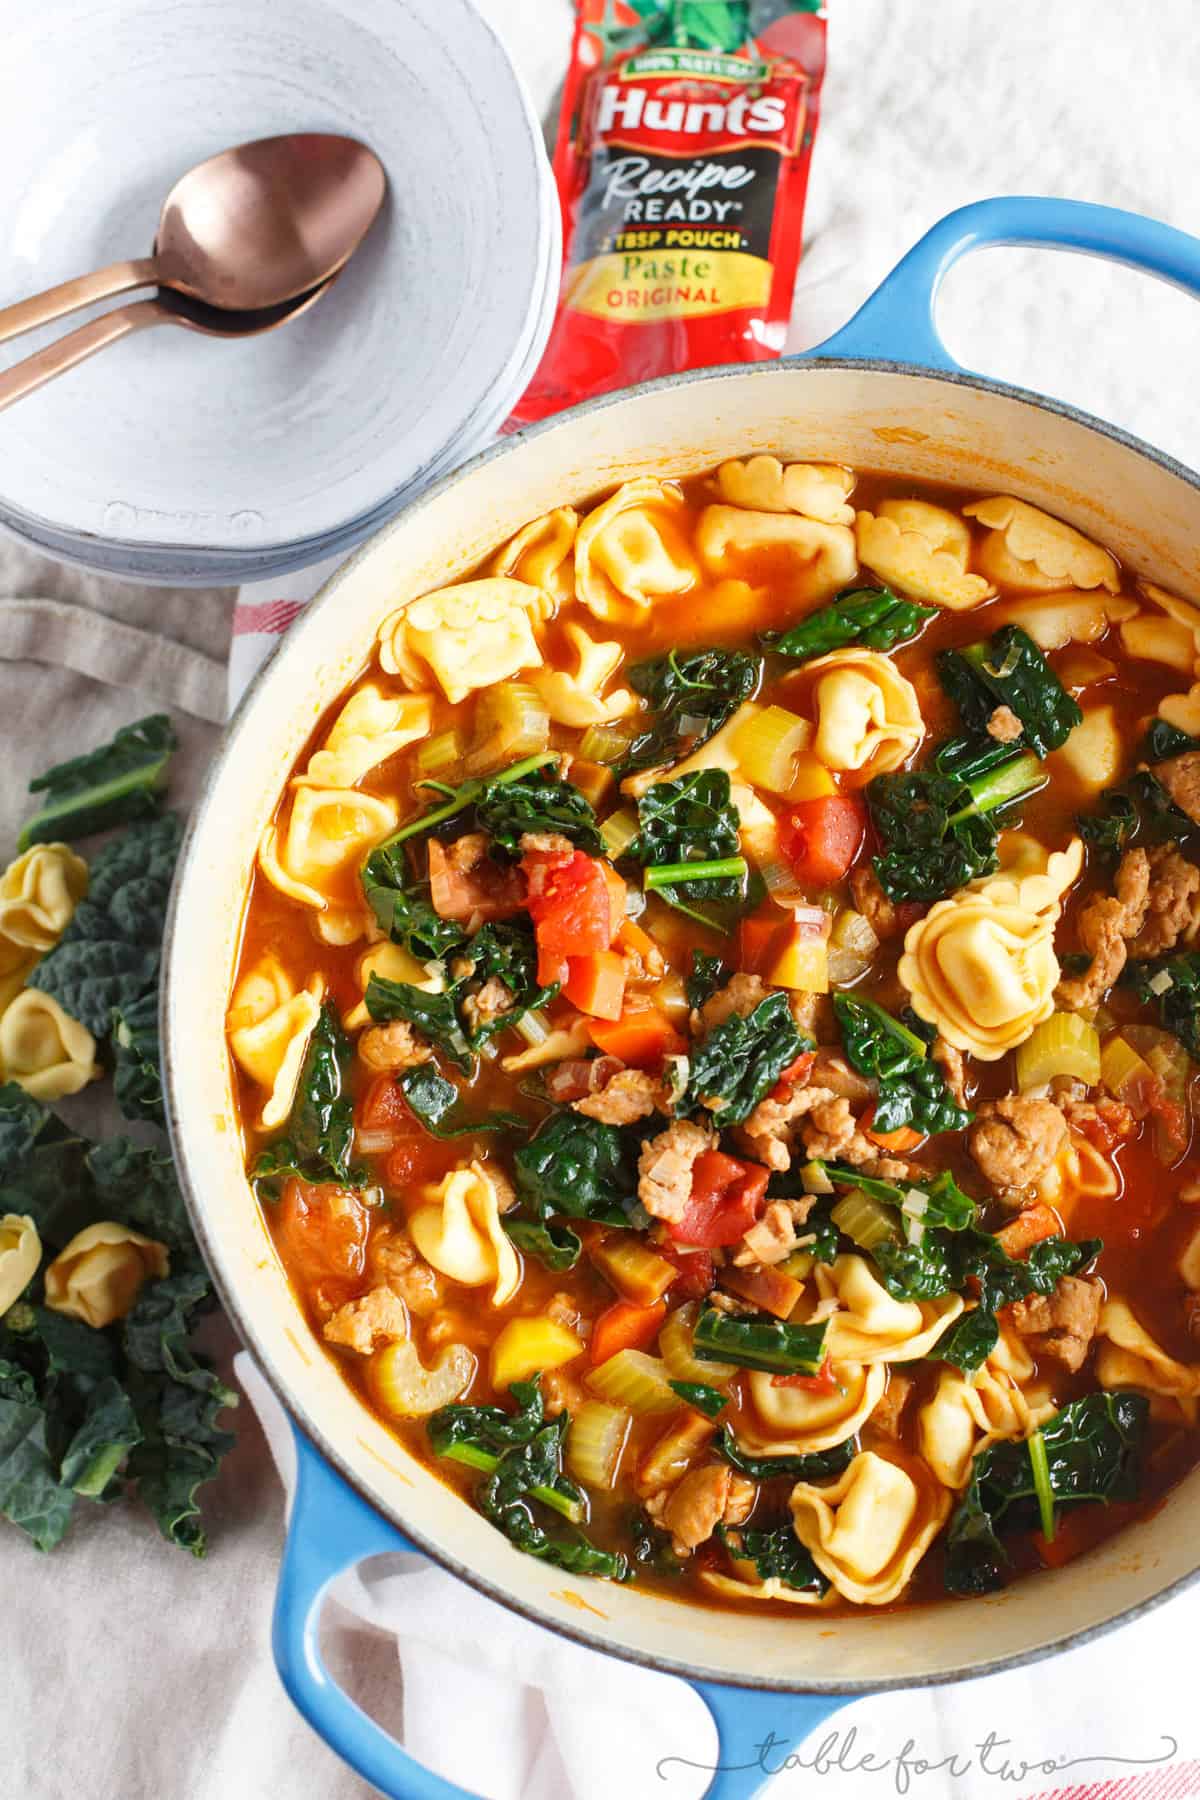 This spicy sausage and vegetable tortellini soup is exactly what you need when cold weather hits! Chock-full of veggies and cheesy tortellini; this soup will warm you right up! #HuntsDifference #ad